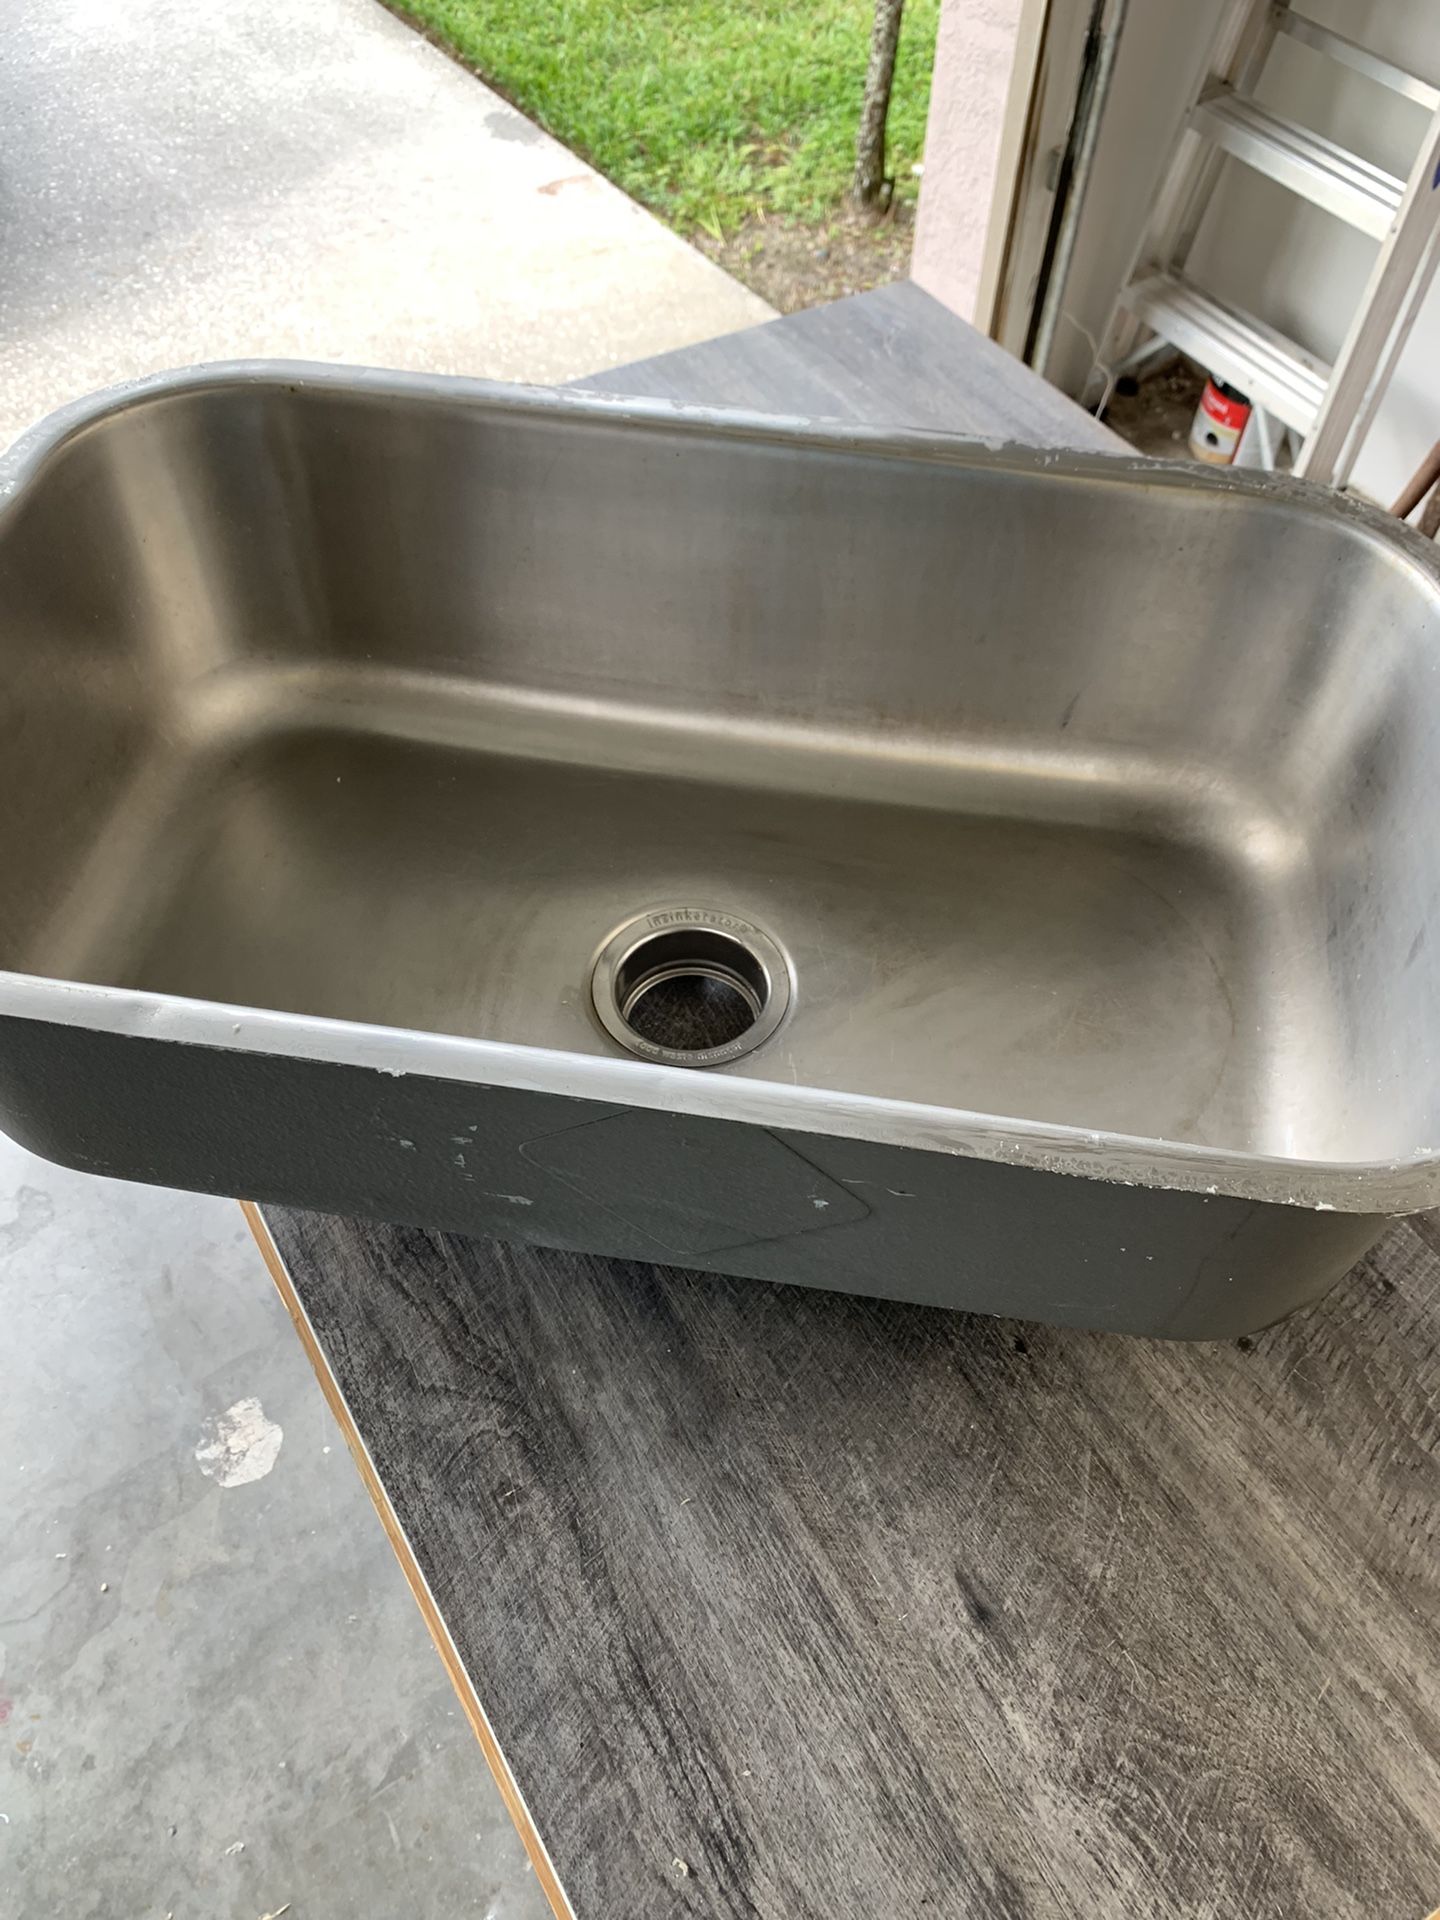 Sink 16 x 28 x 8.5 inches